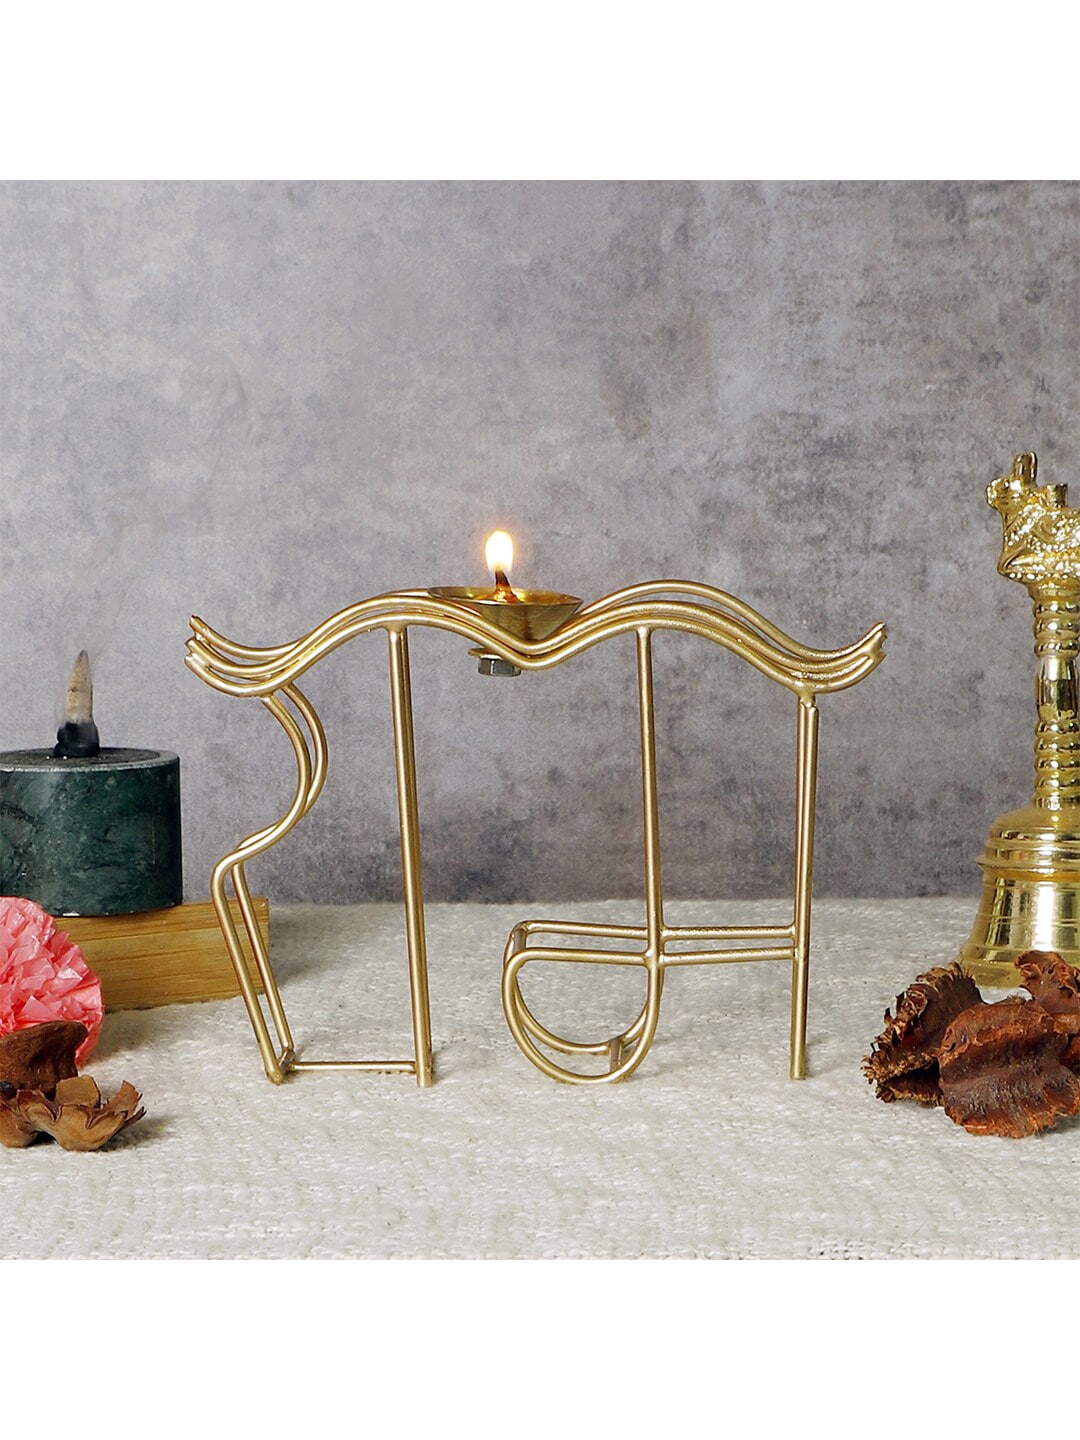 Amaya Decors Gold-Toned Ram Akhand Table Dia Price in India